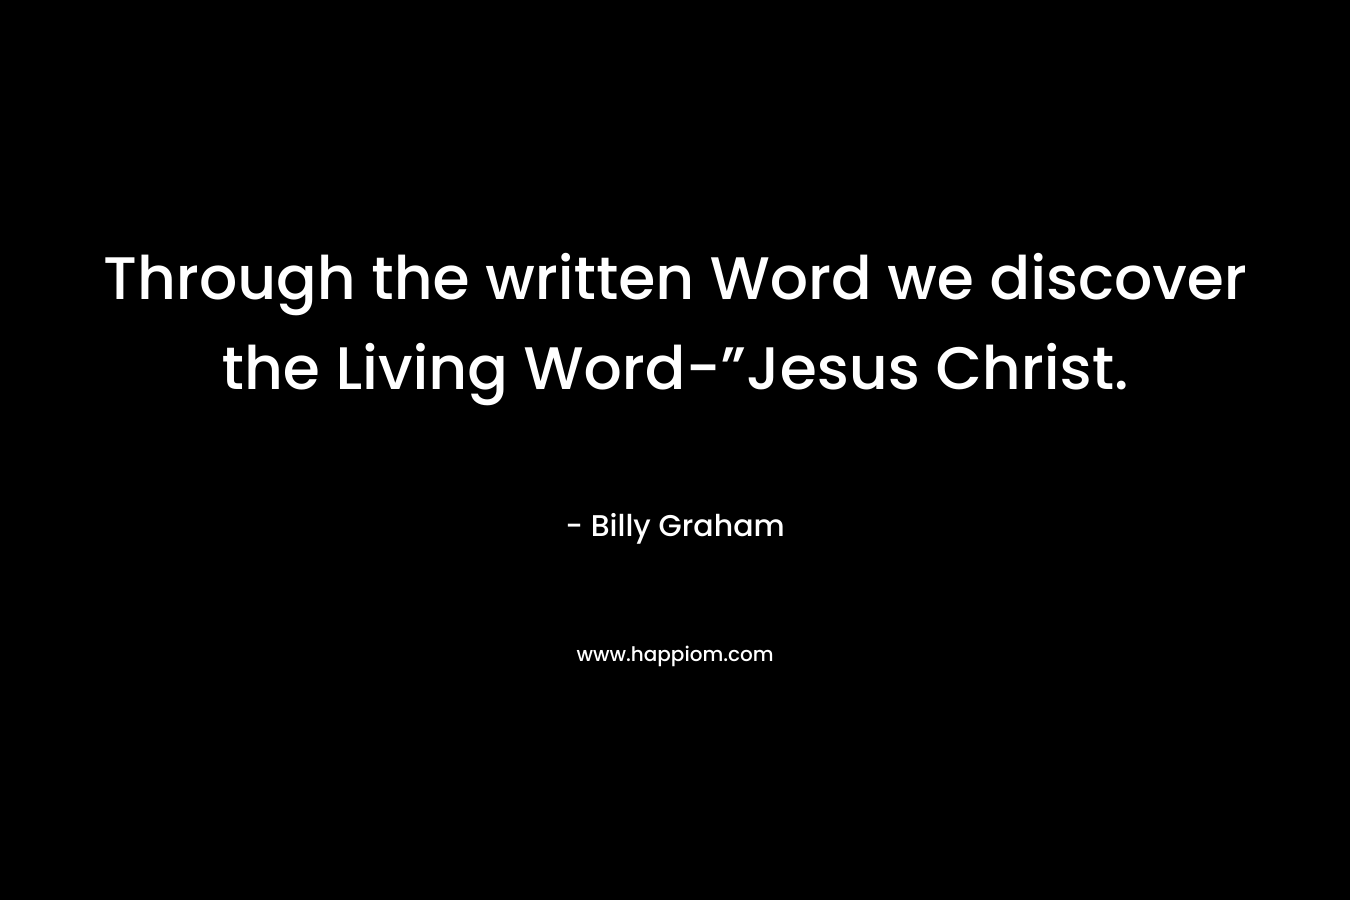 Through the written Word we discover the Living Word-”Jesus Christ.